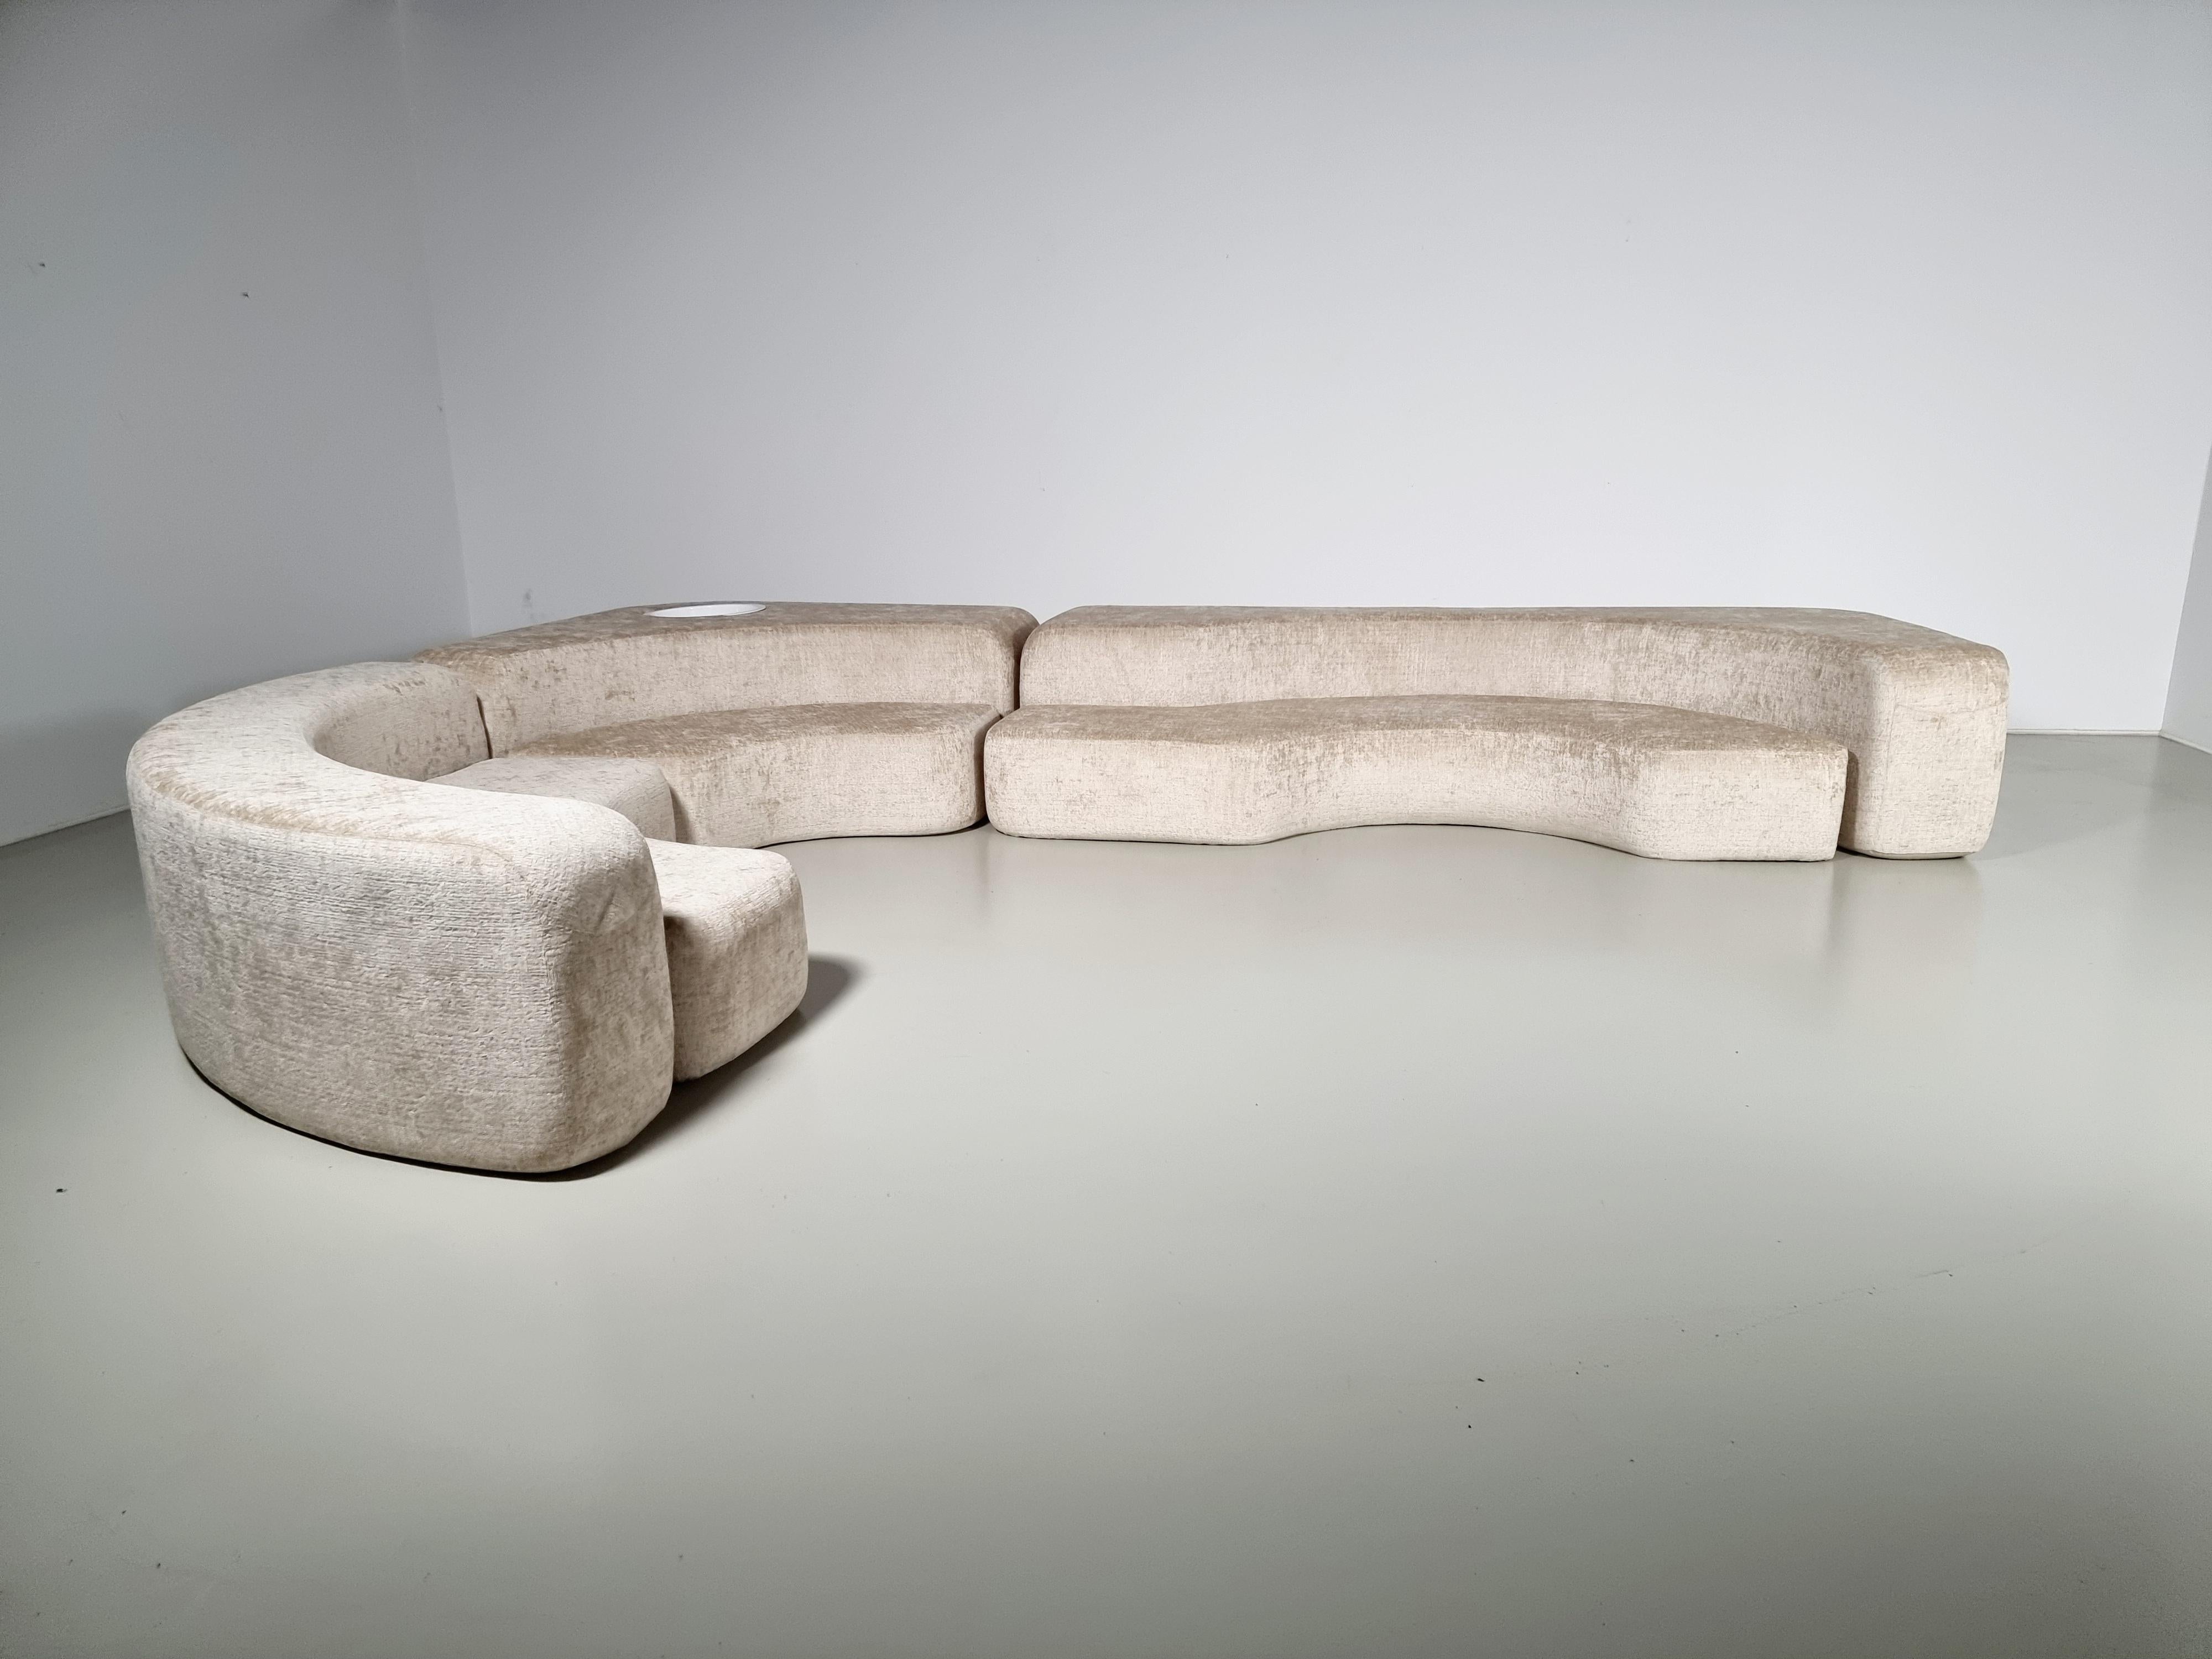 Ennio Chiggio for Nikol Internazionale, Italy, 1970s

This important canapé Environ One is designed by Ennio Chiggio for Nikol Internazionale in the 1970s. This rare modular sofa is very voluptuous and very large. The shape is organic and creates a